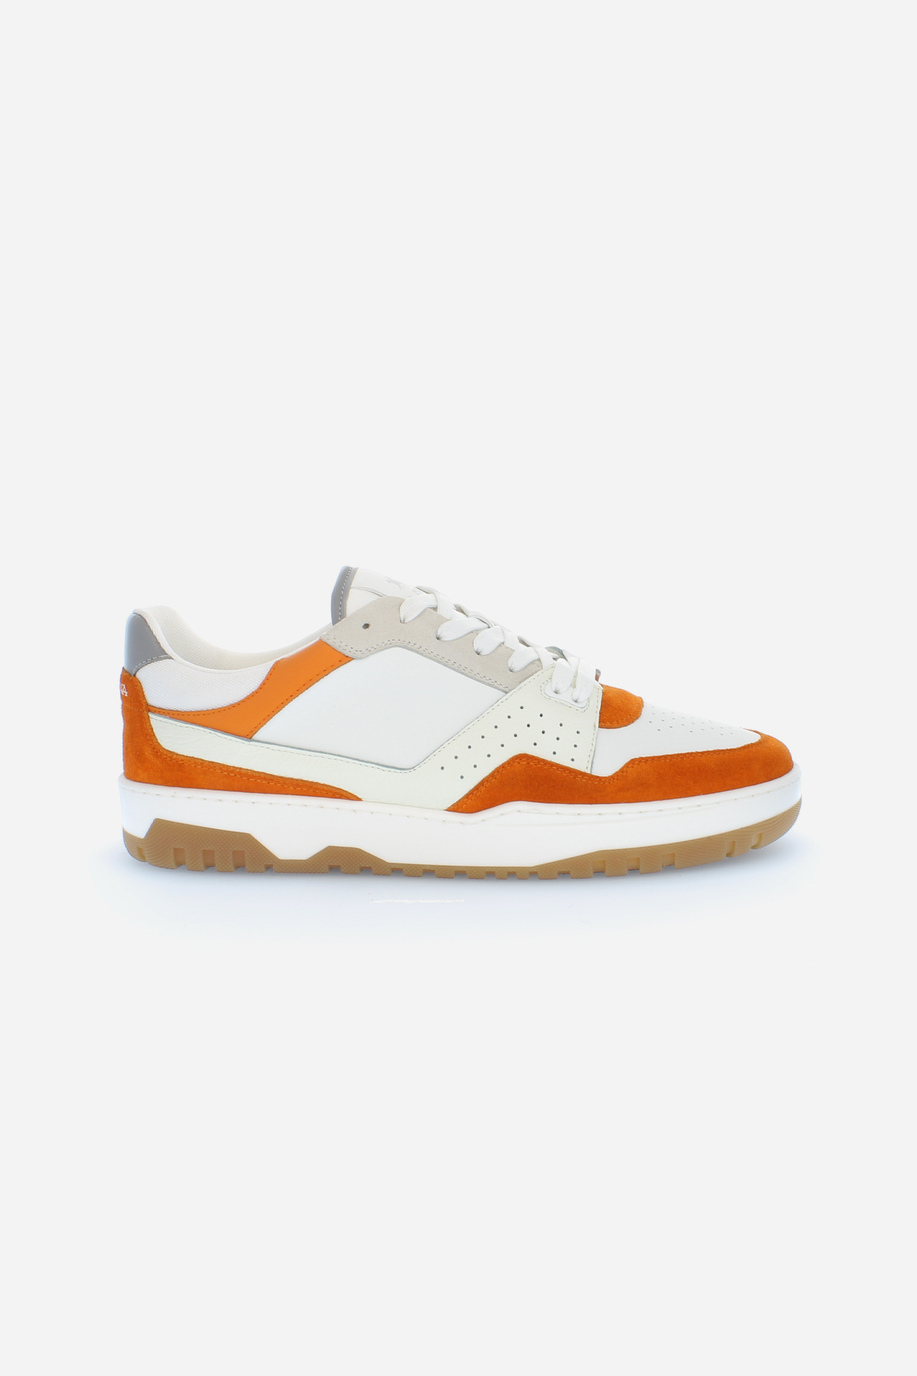 New vintage men's basketball sneaker in mixed vegetable leather - Field 85 - Shoes and Accessories | La Martina - Official Online Shop